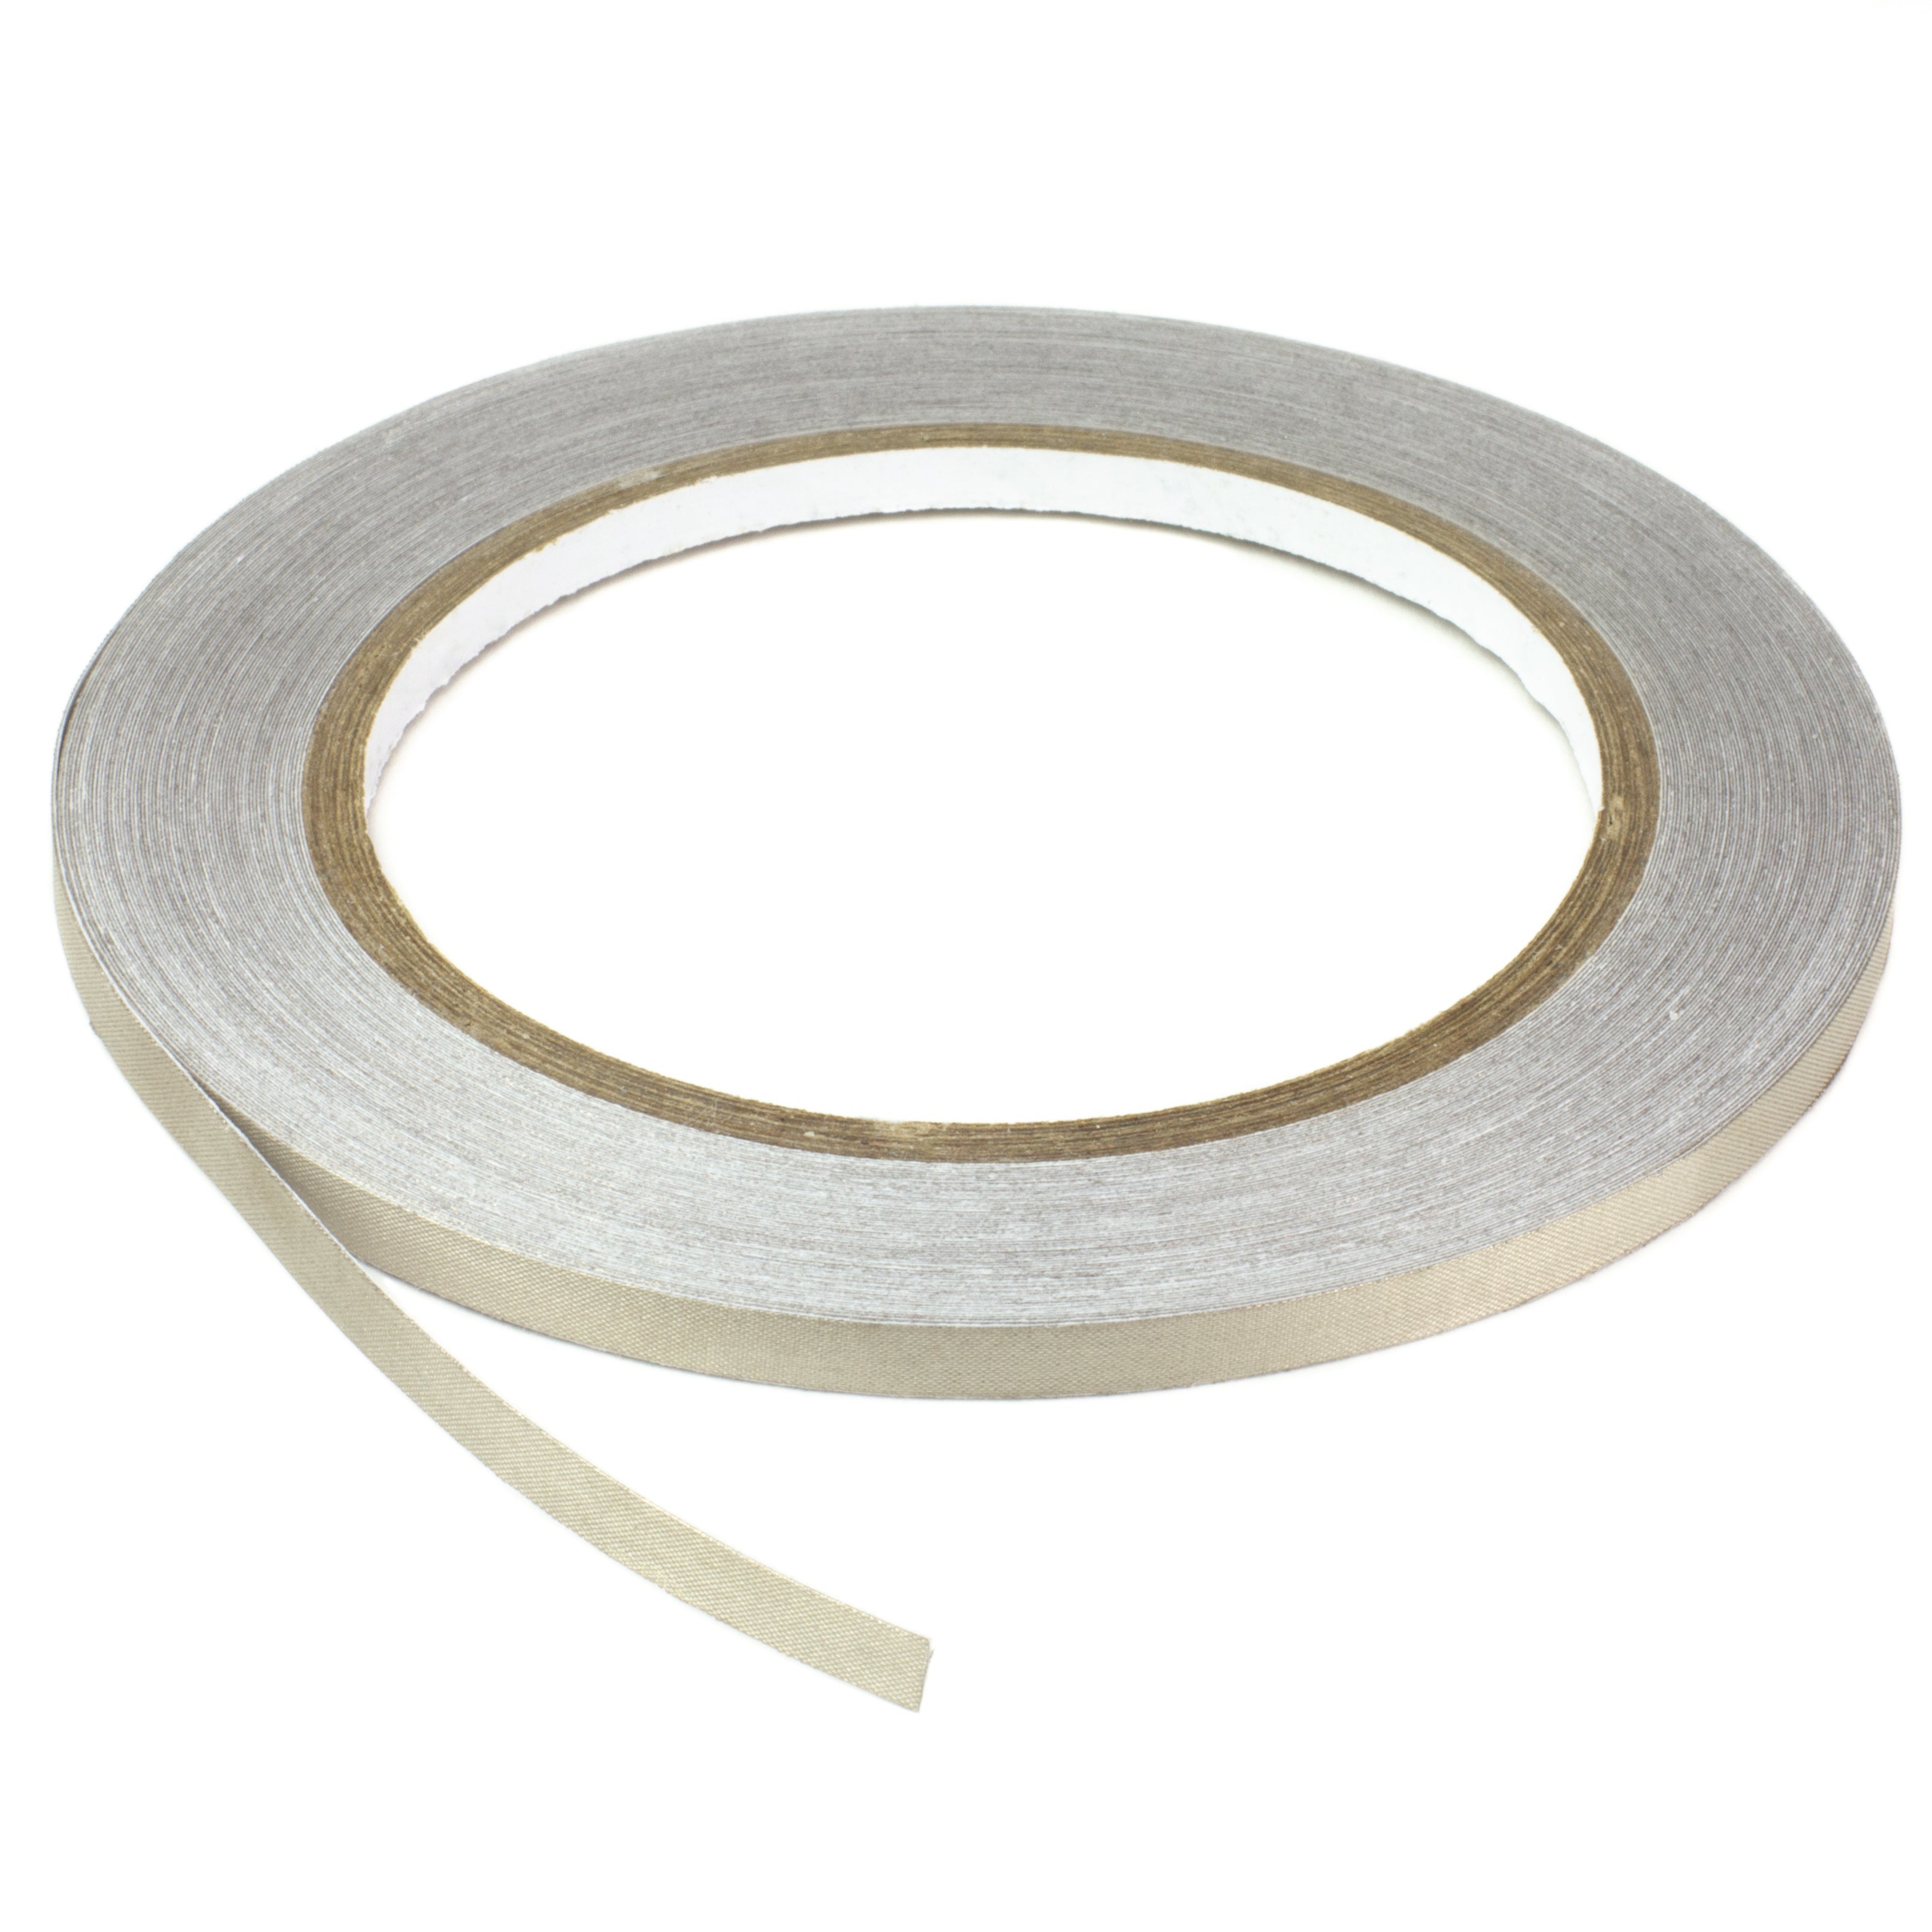 Conductive Nylon Fabric Tape - 5mm Wide x 10 meters long